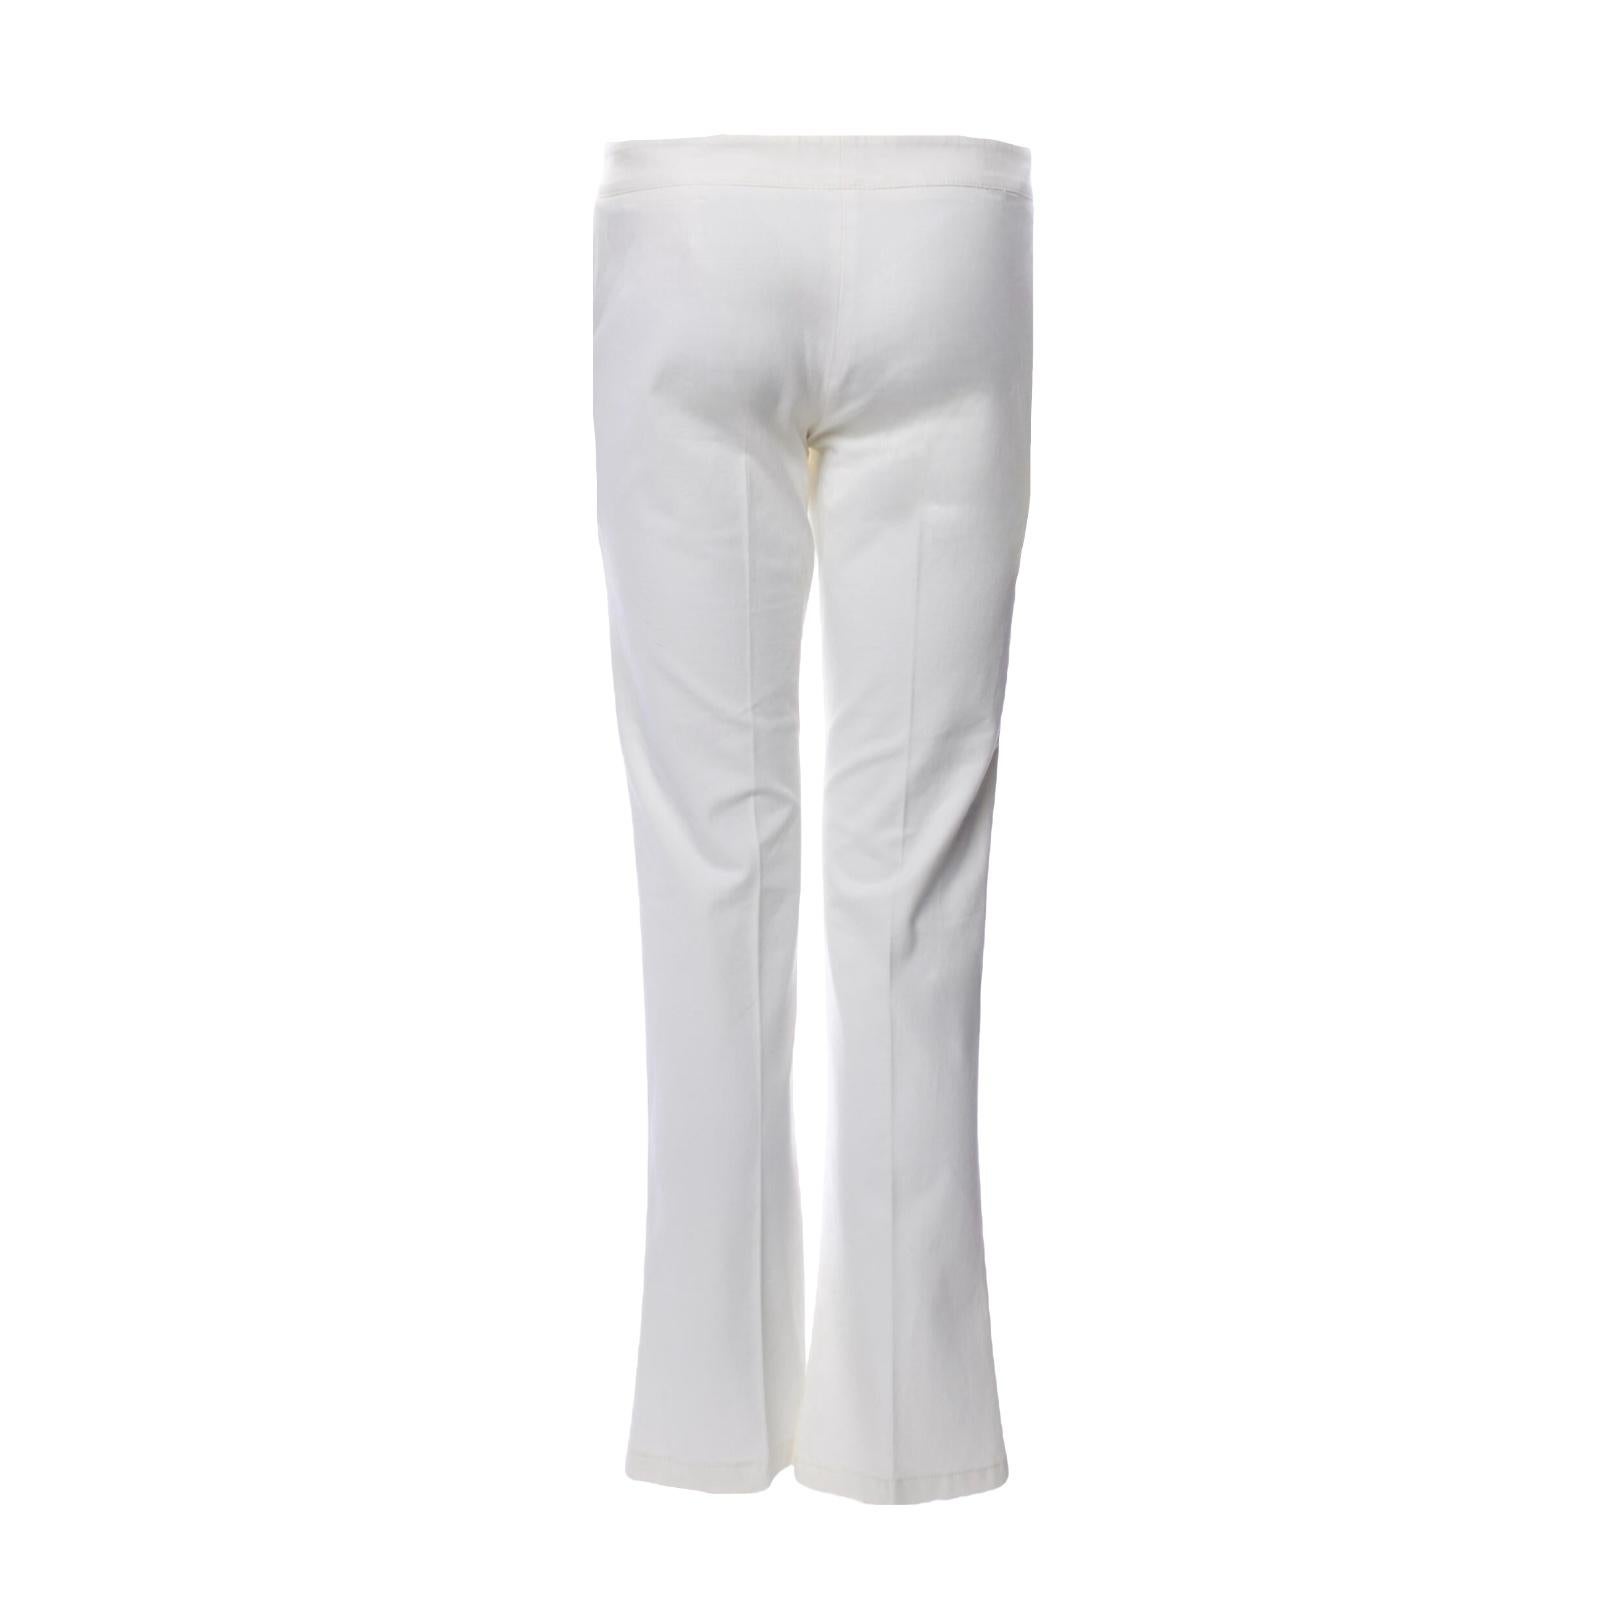 These trousers channel Pucci's love of statement 70s silhouettes. Rendered in bright white, they boast a flared crop fit.

Details:

Flared pants
Pressed creases
Two side zip pockets
Light-gold hardware engraved with 